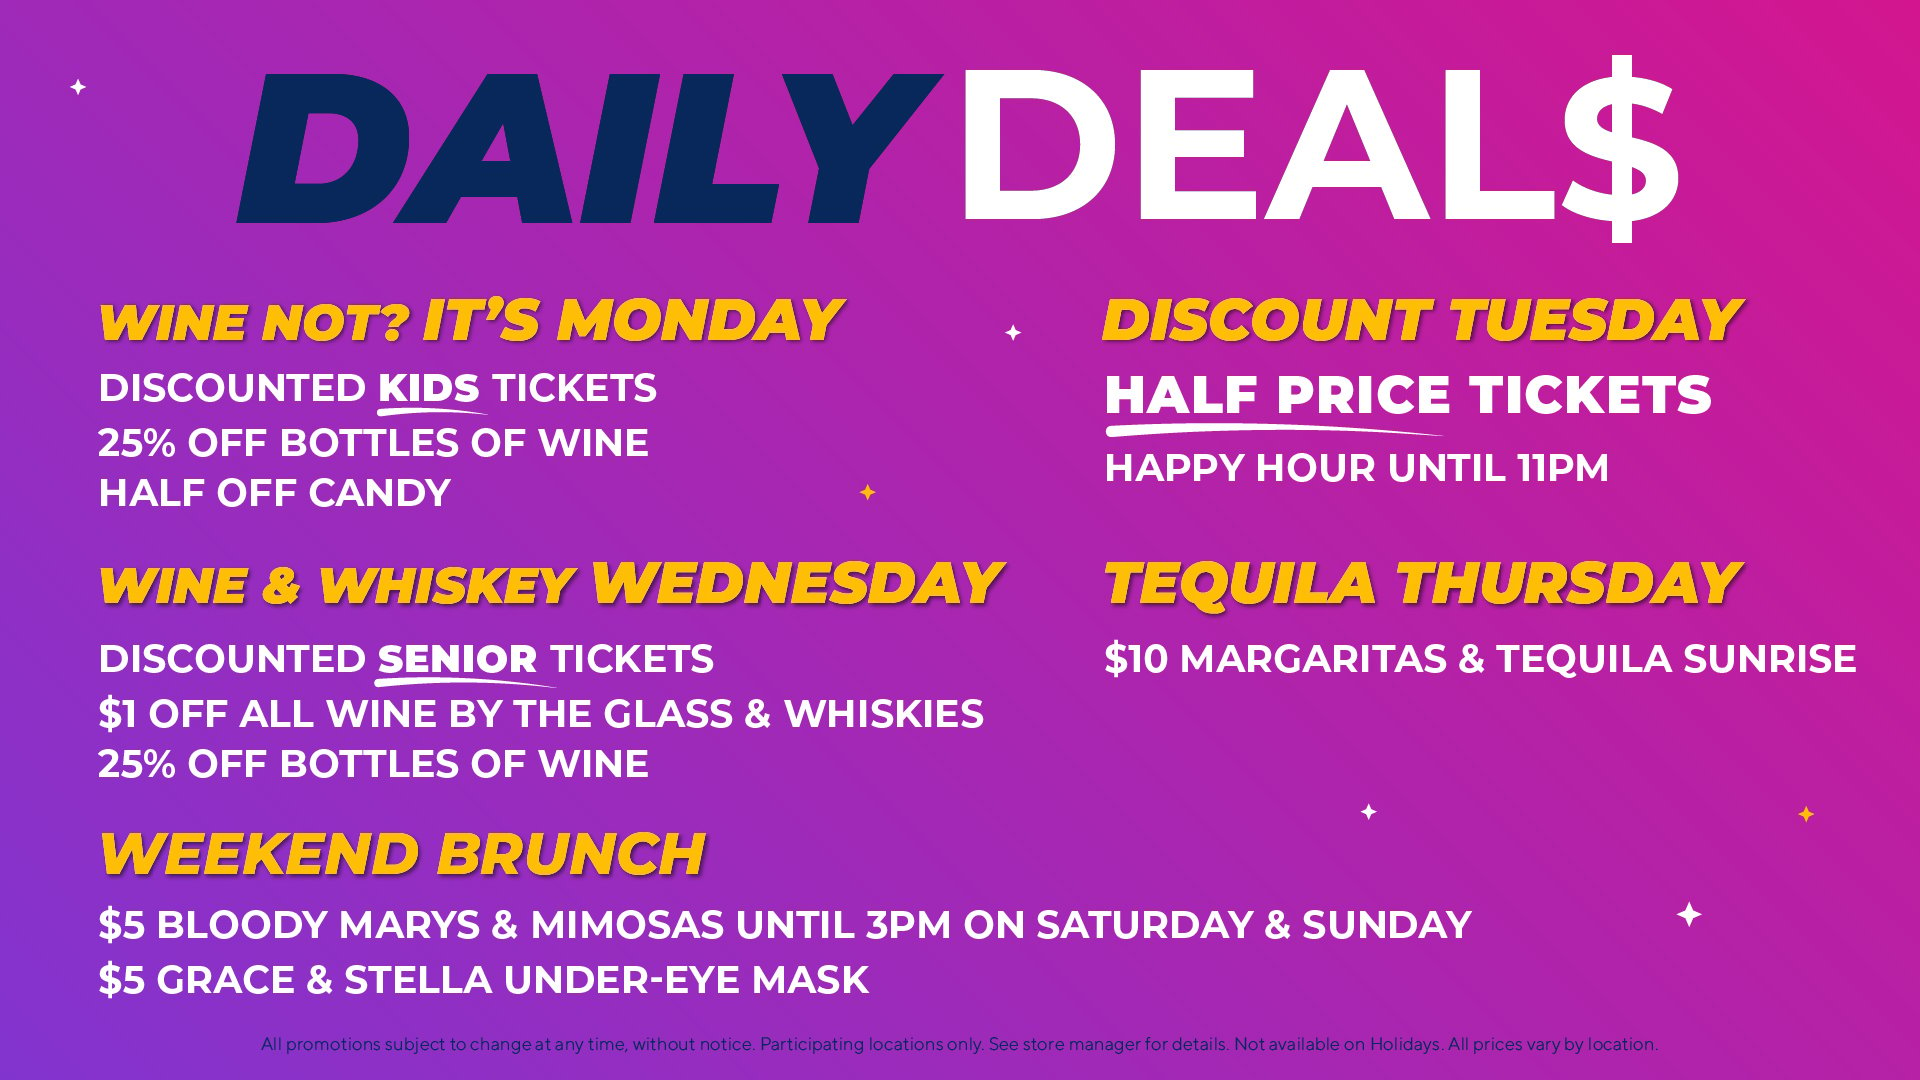 Enjoy great deals every day of the week!